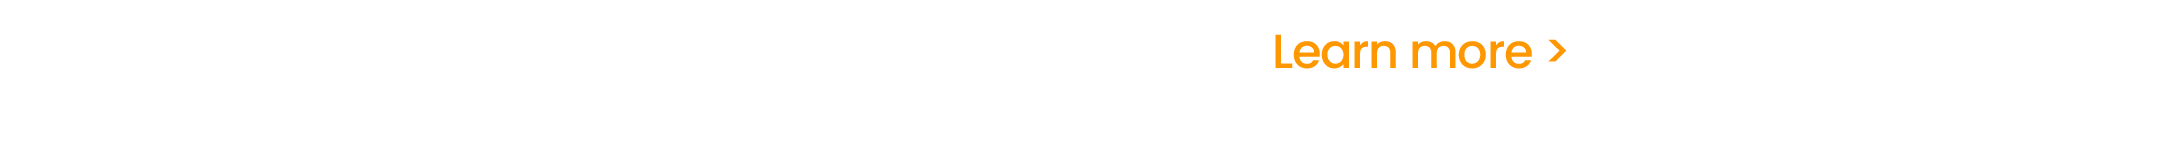 Why do cyber security companies buy from Openprise?